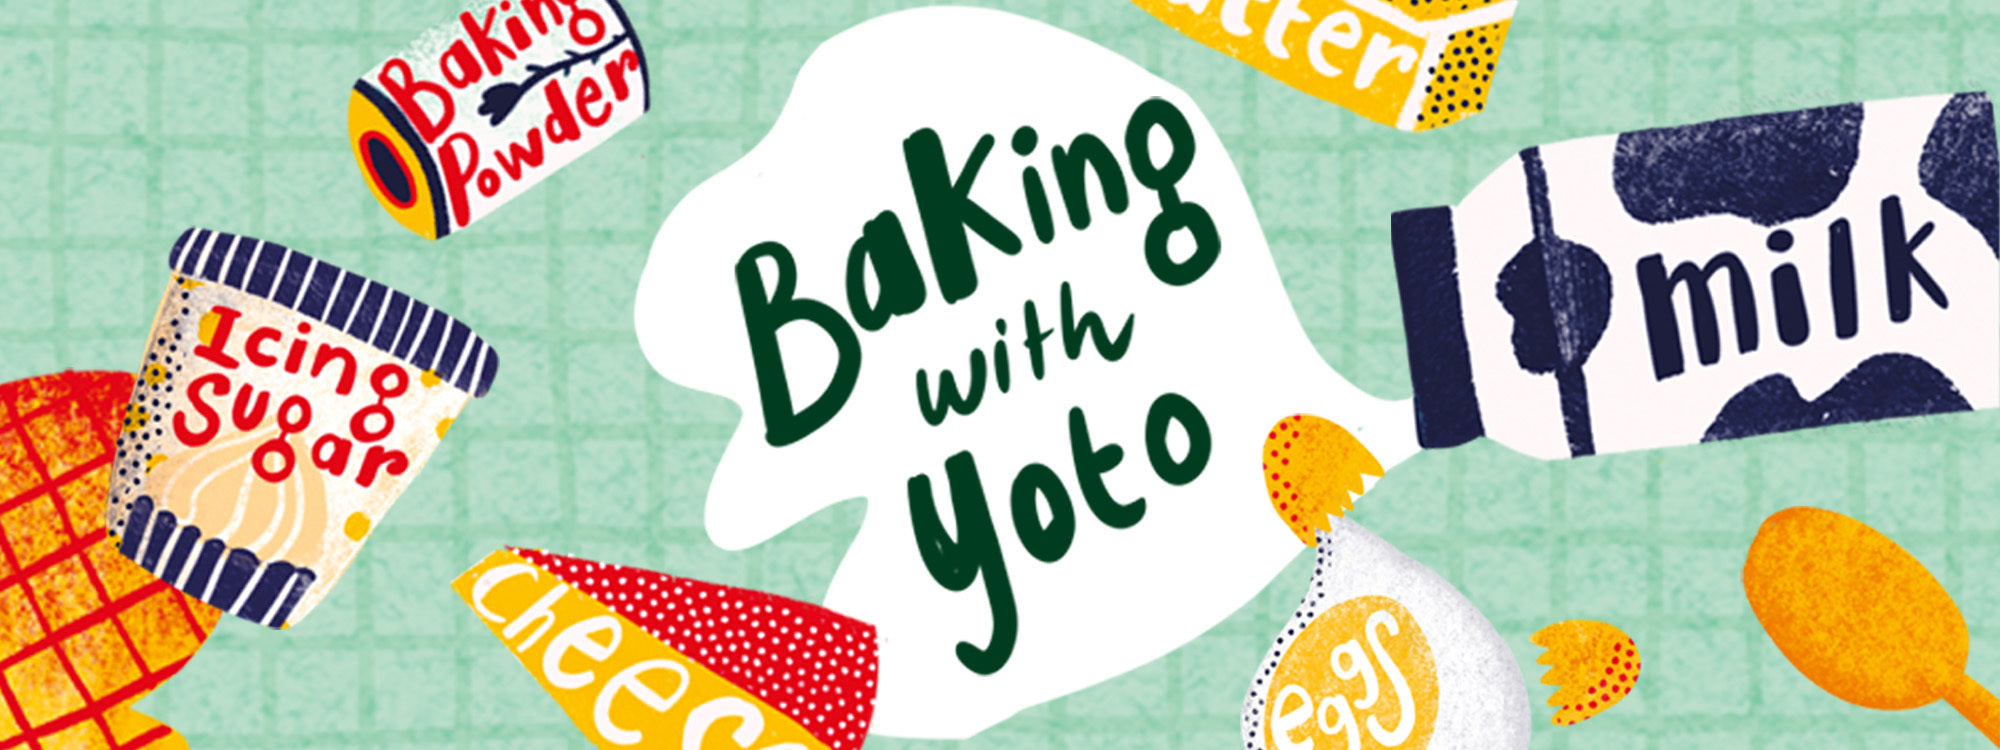 Get Baking with Yoto, with tips from Little Cooks.